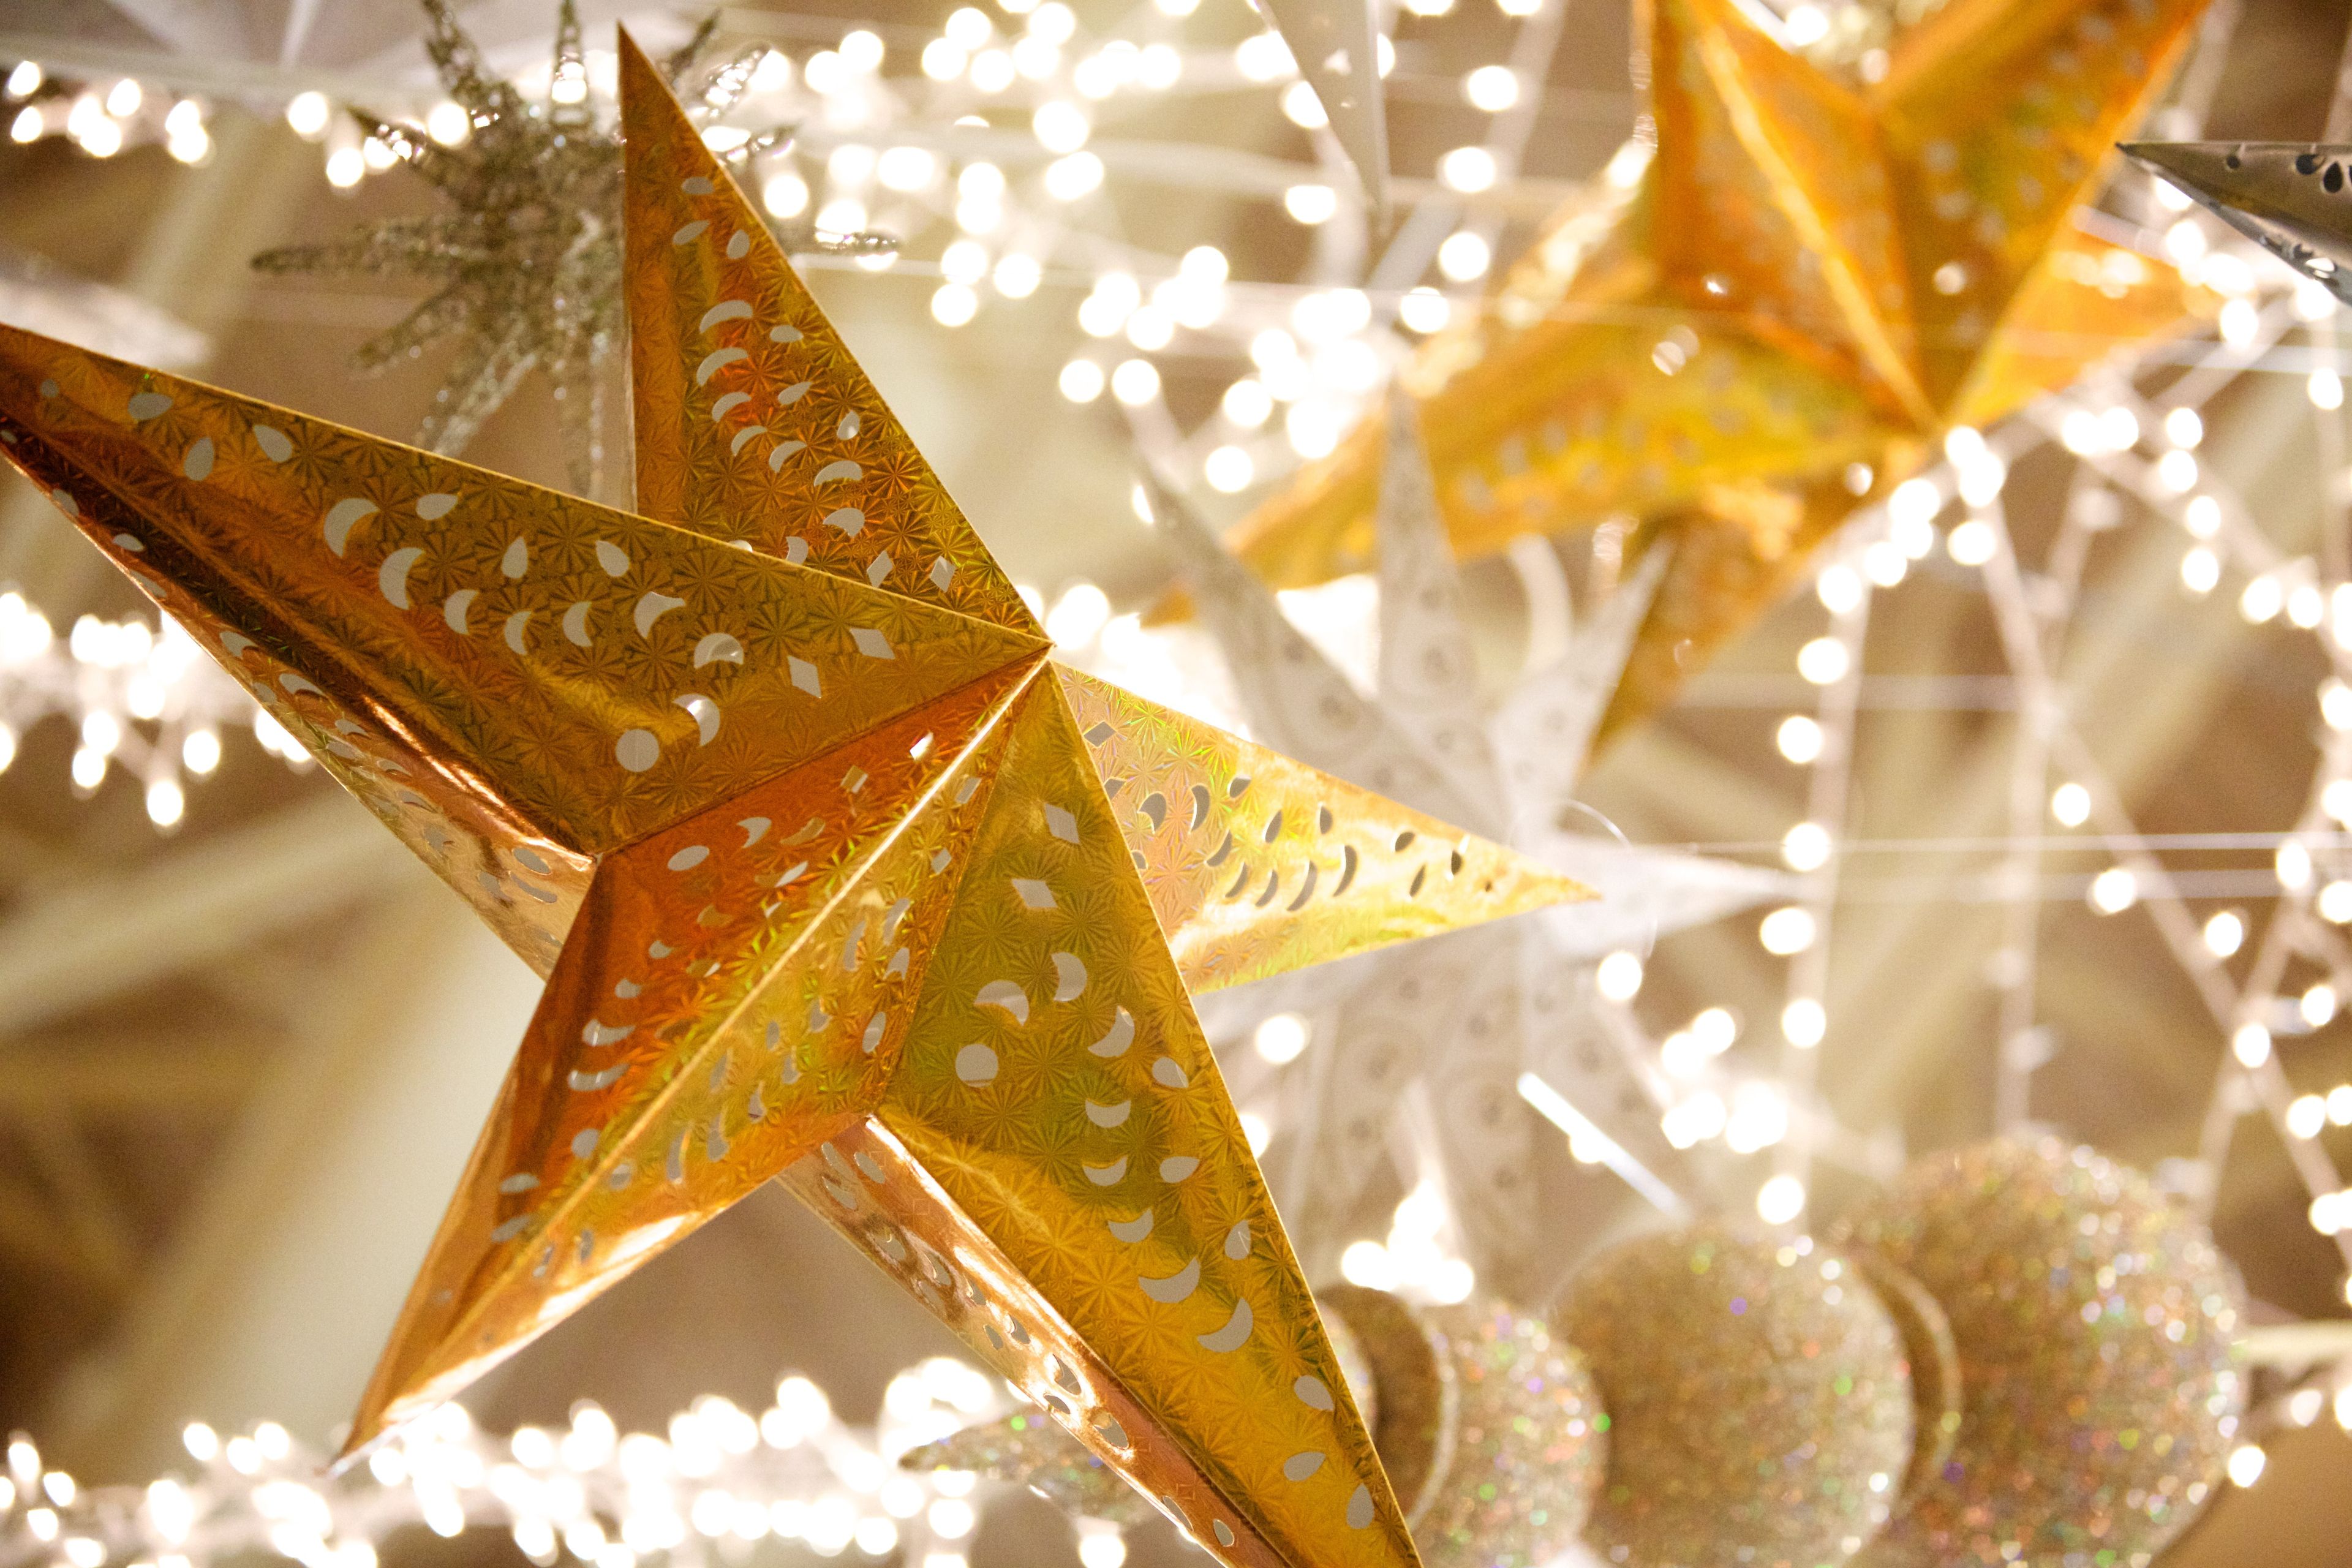 Some gold foil stars hang as part of a Christmas decoration display.